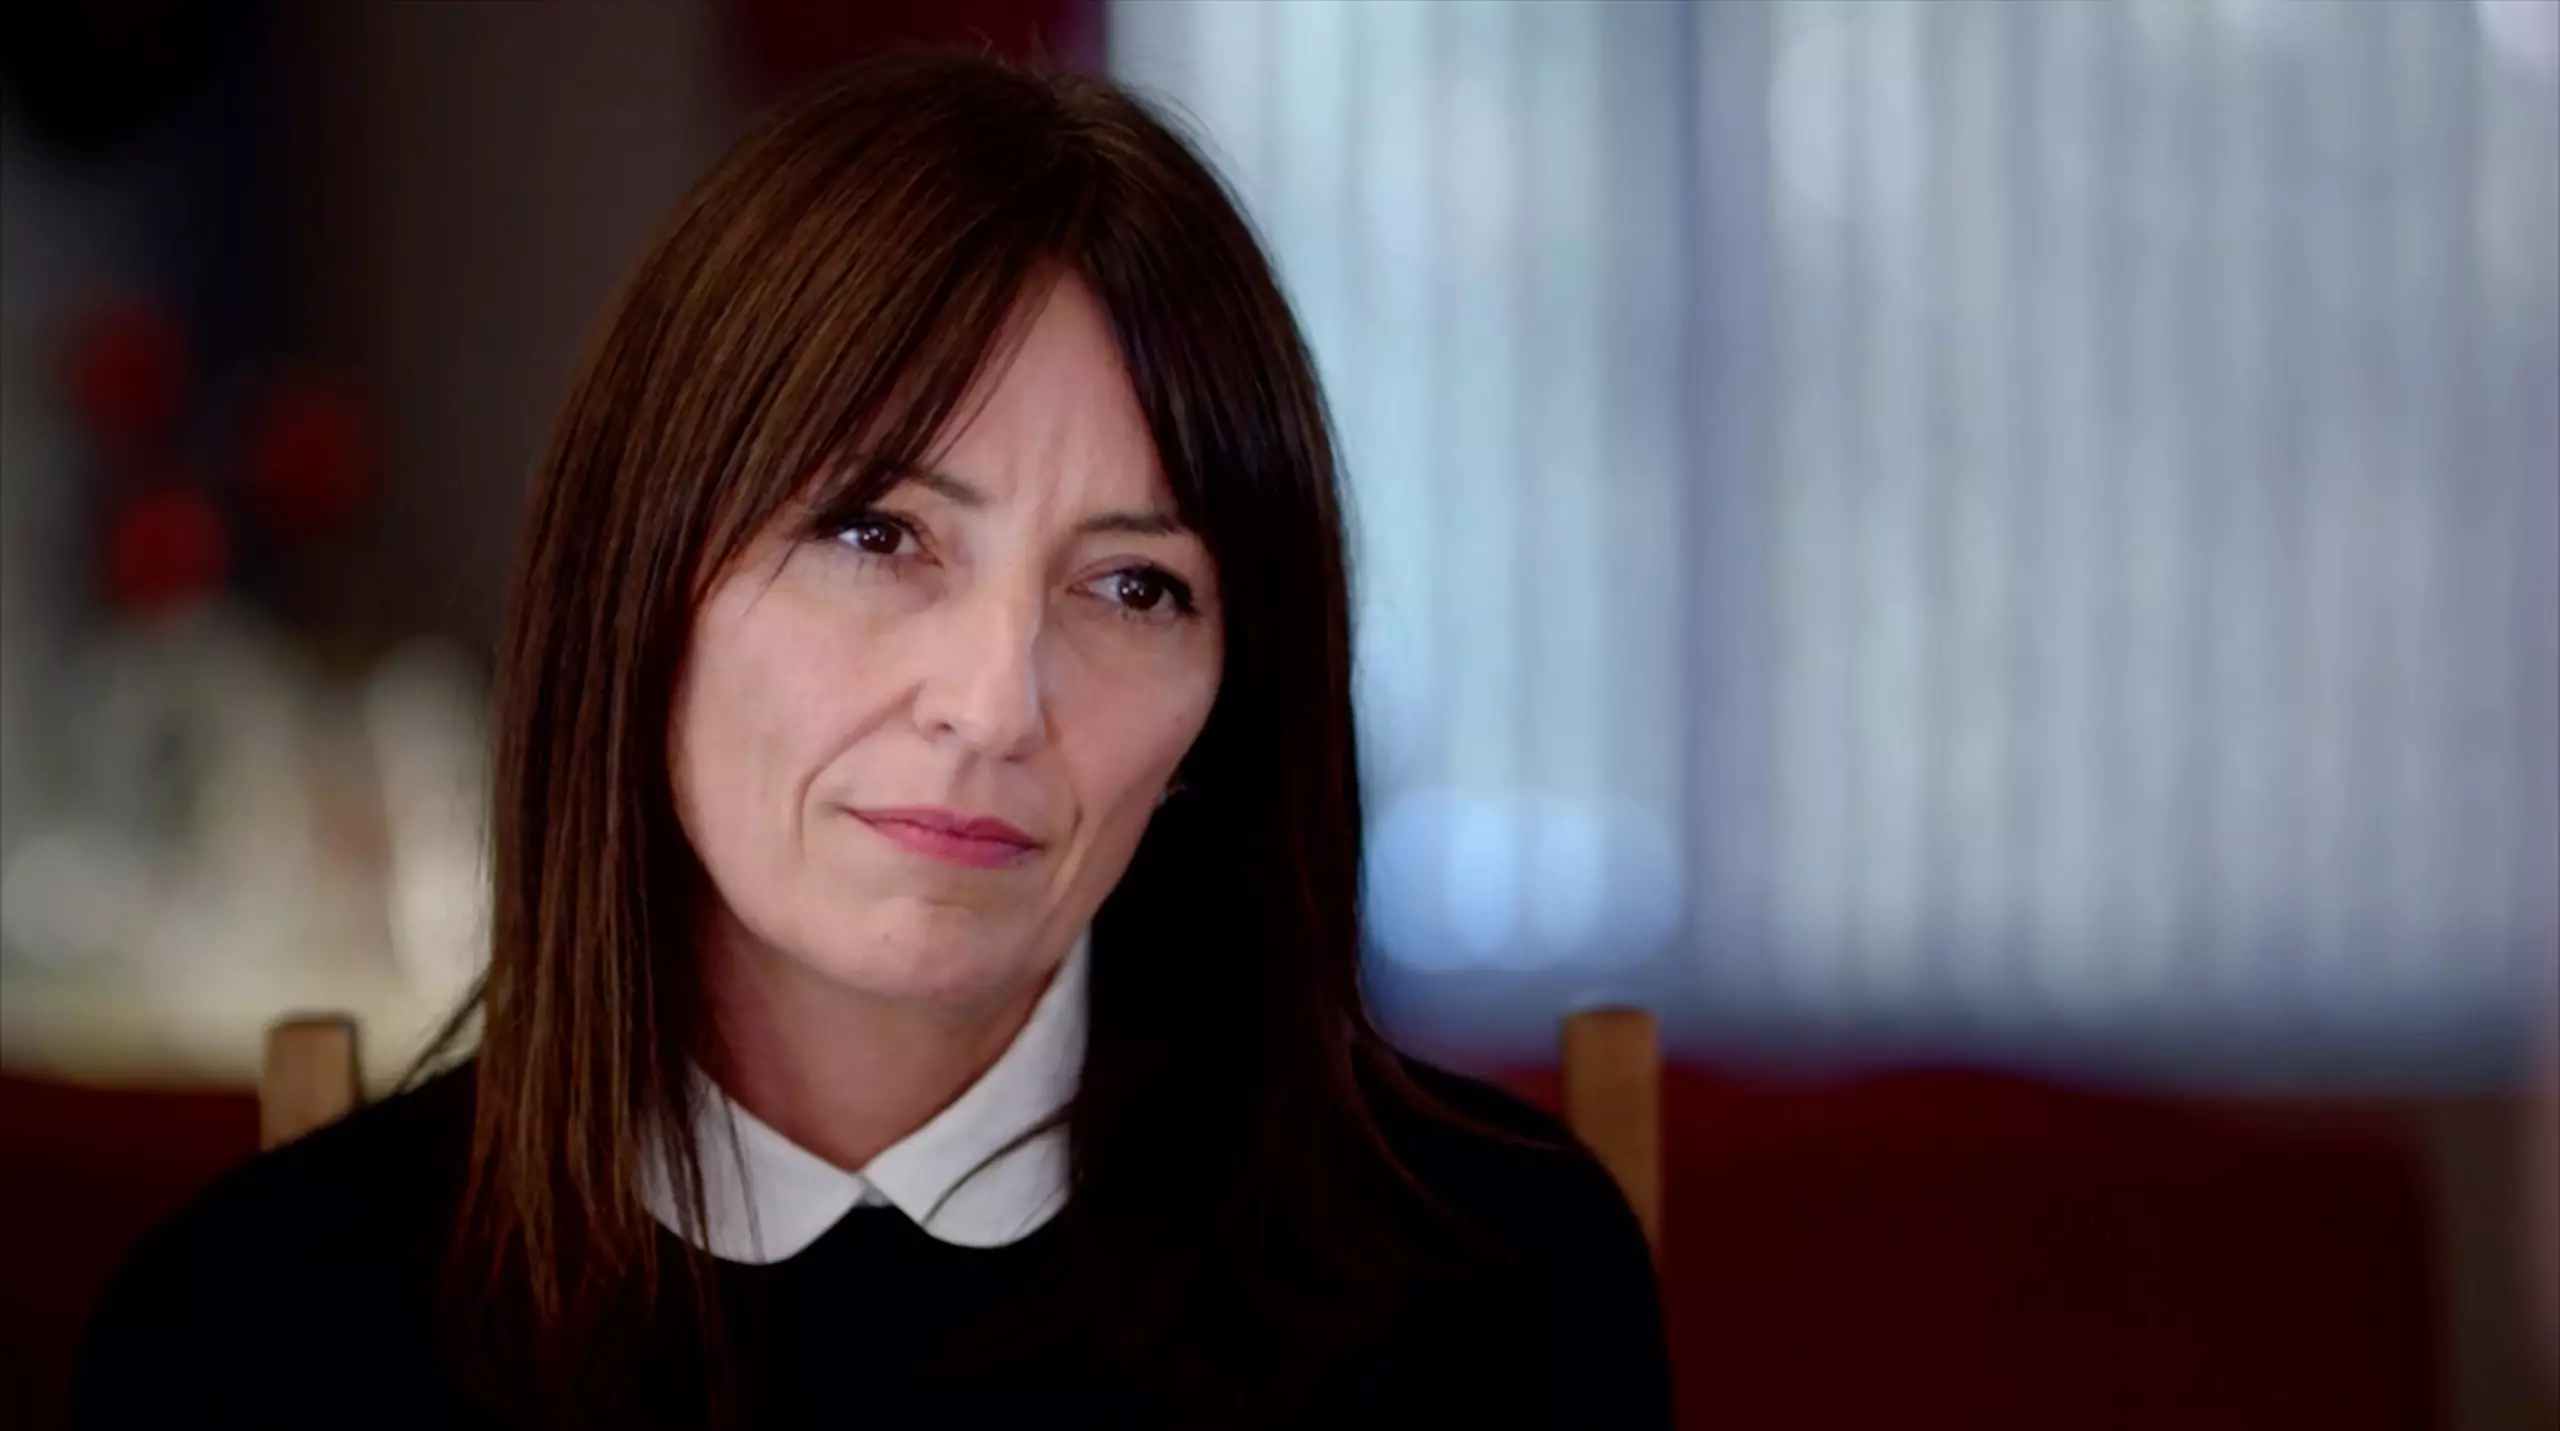 Davina McCall returns alongside Nicky Campbell for the two-part documentary (